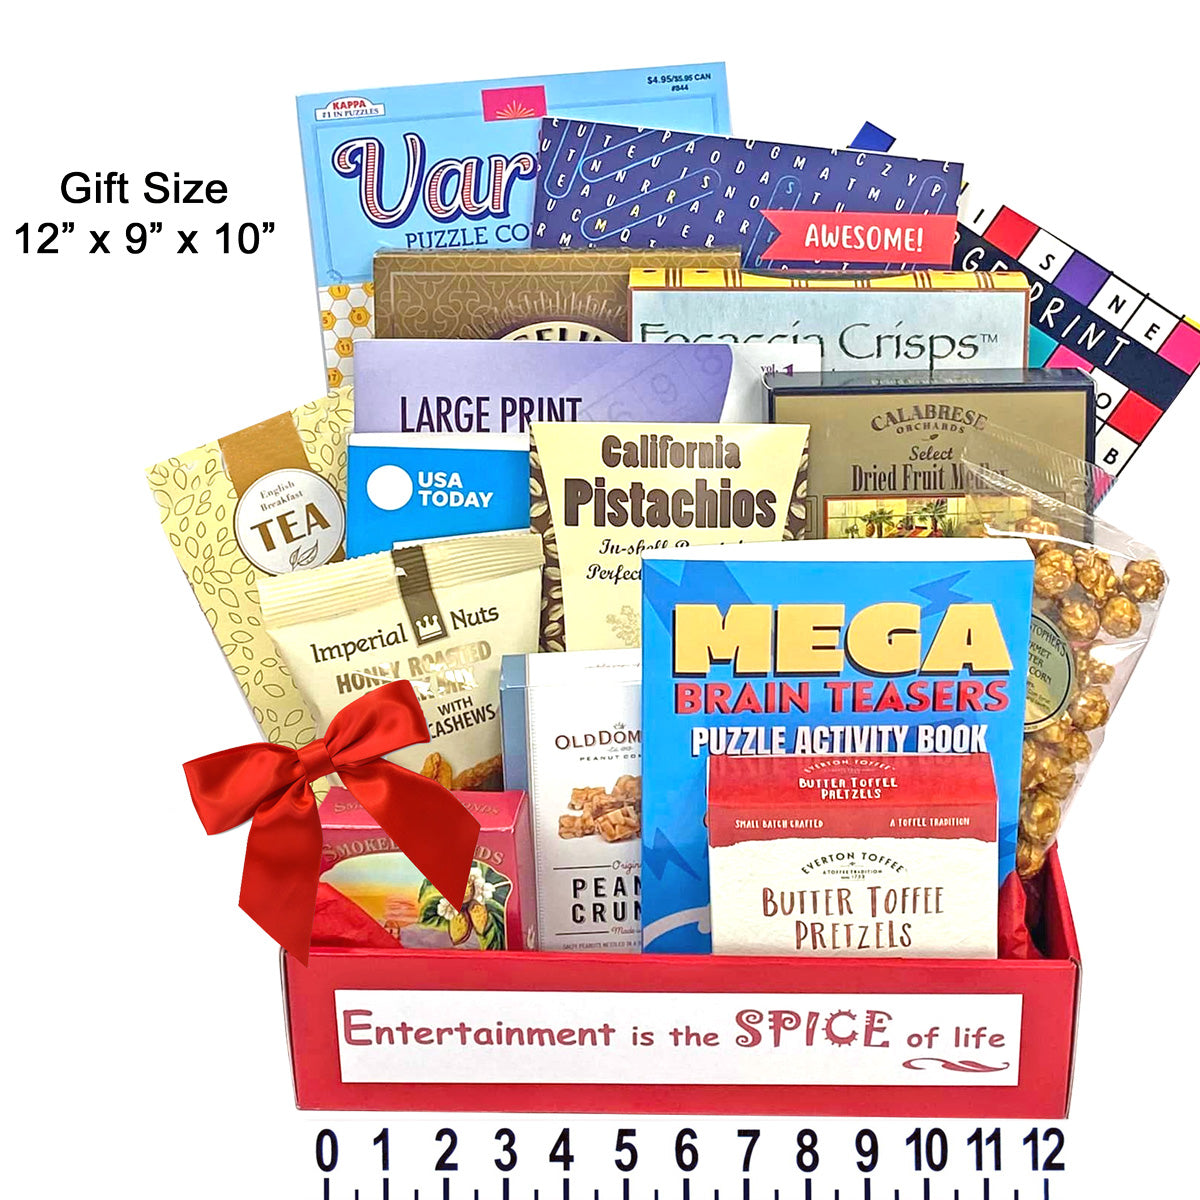 Care Package with Puzzle Books and Popcorn Sending Smiles Gift Basket for Women, Men, Parents, Grandparents, Clients or Co-Workers